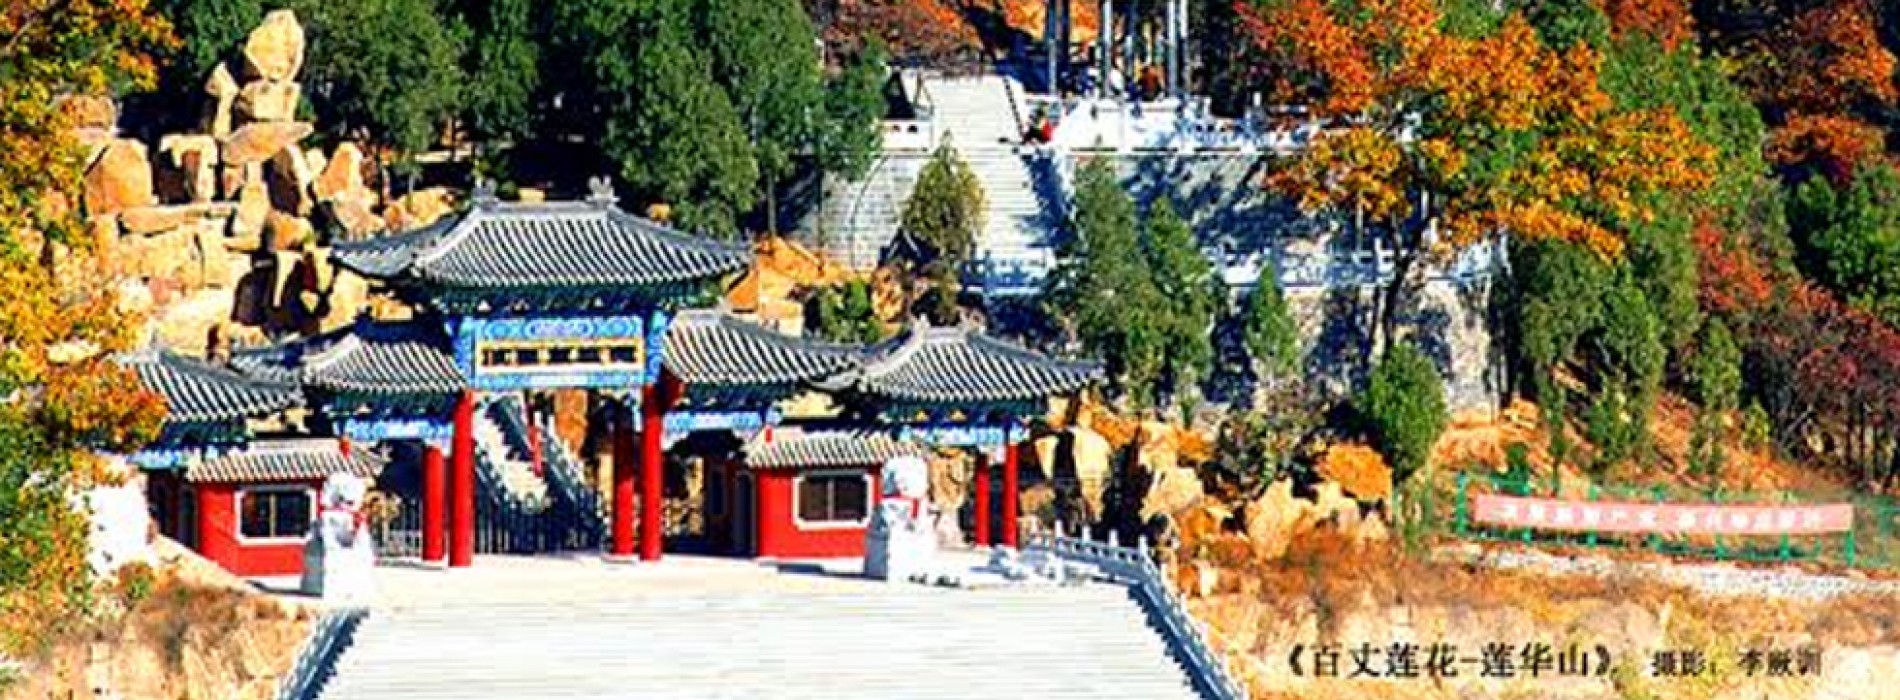 Blue Square Consultants to represent Shandong Tourism in India